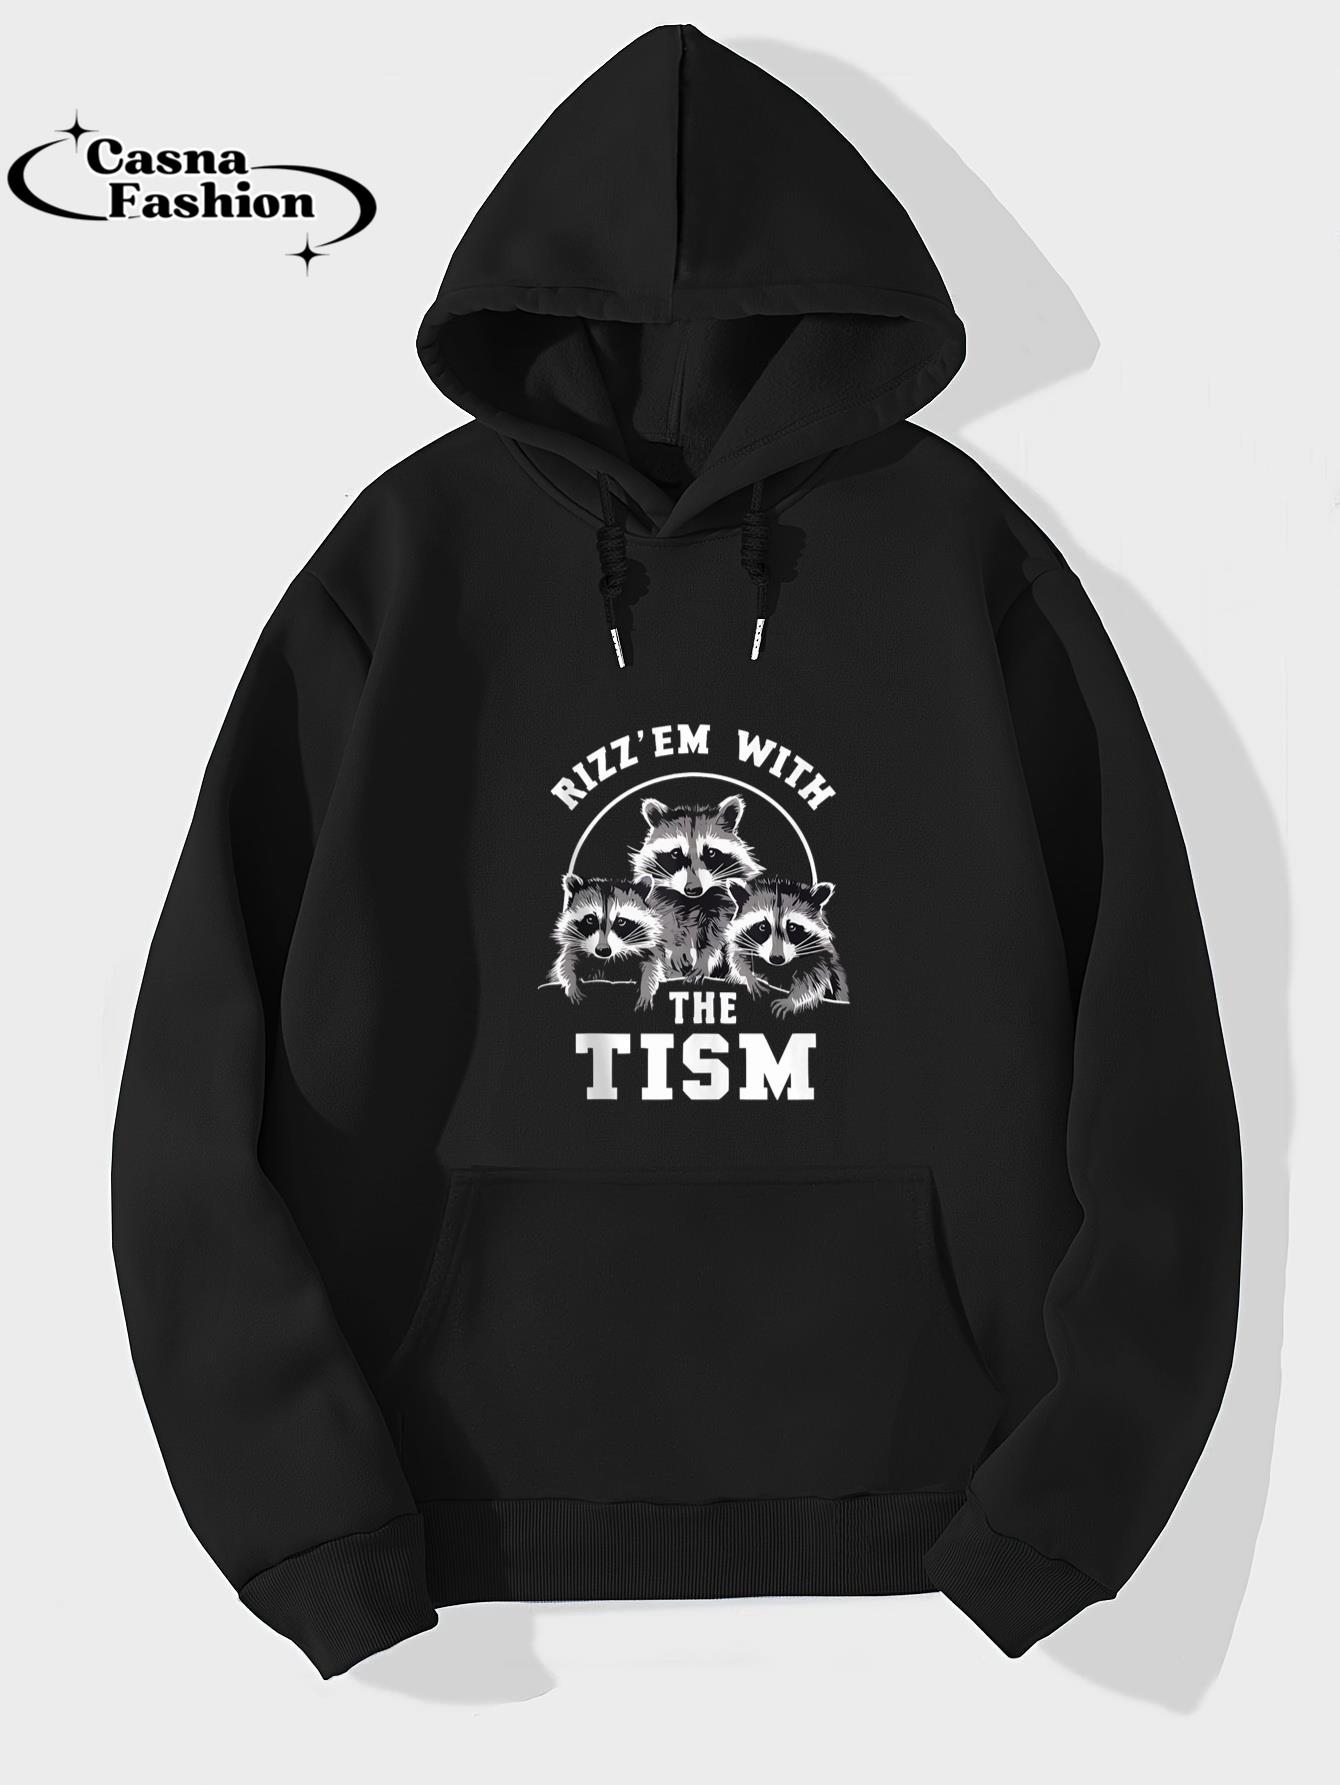 casnafashion_Hoodie_Autism Funny Rizz Em With The Tism Meme Autistic Raccoons Tank Top_hoodie_black hoodie